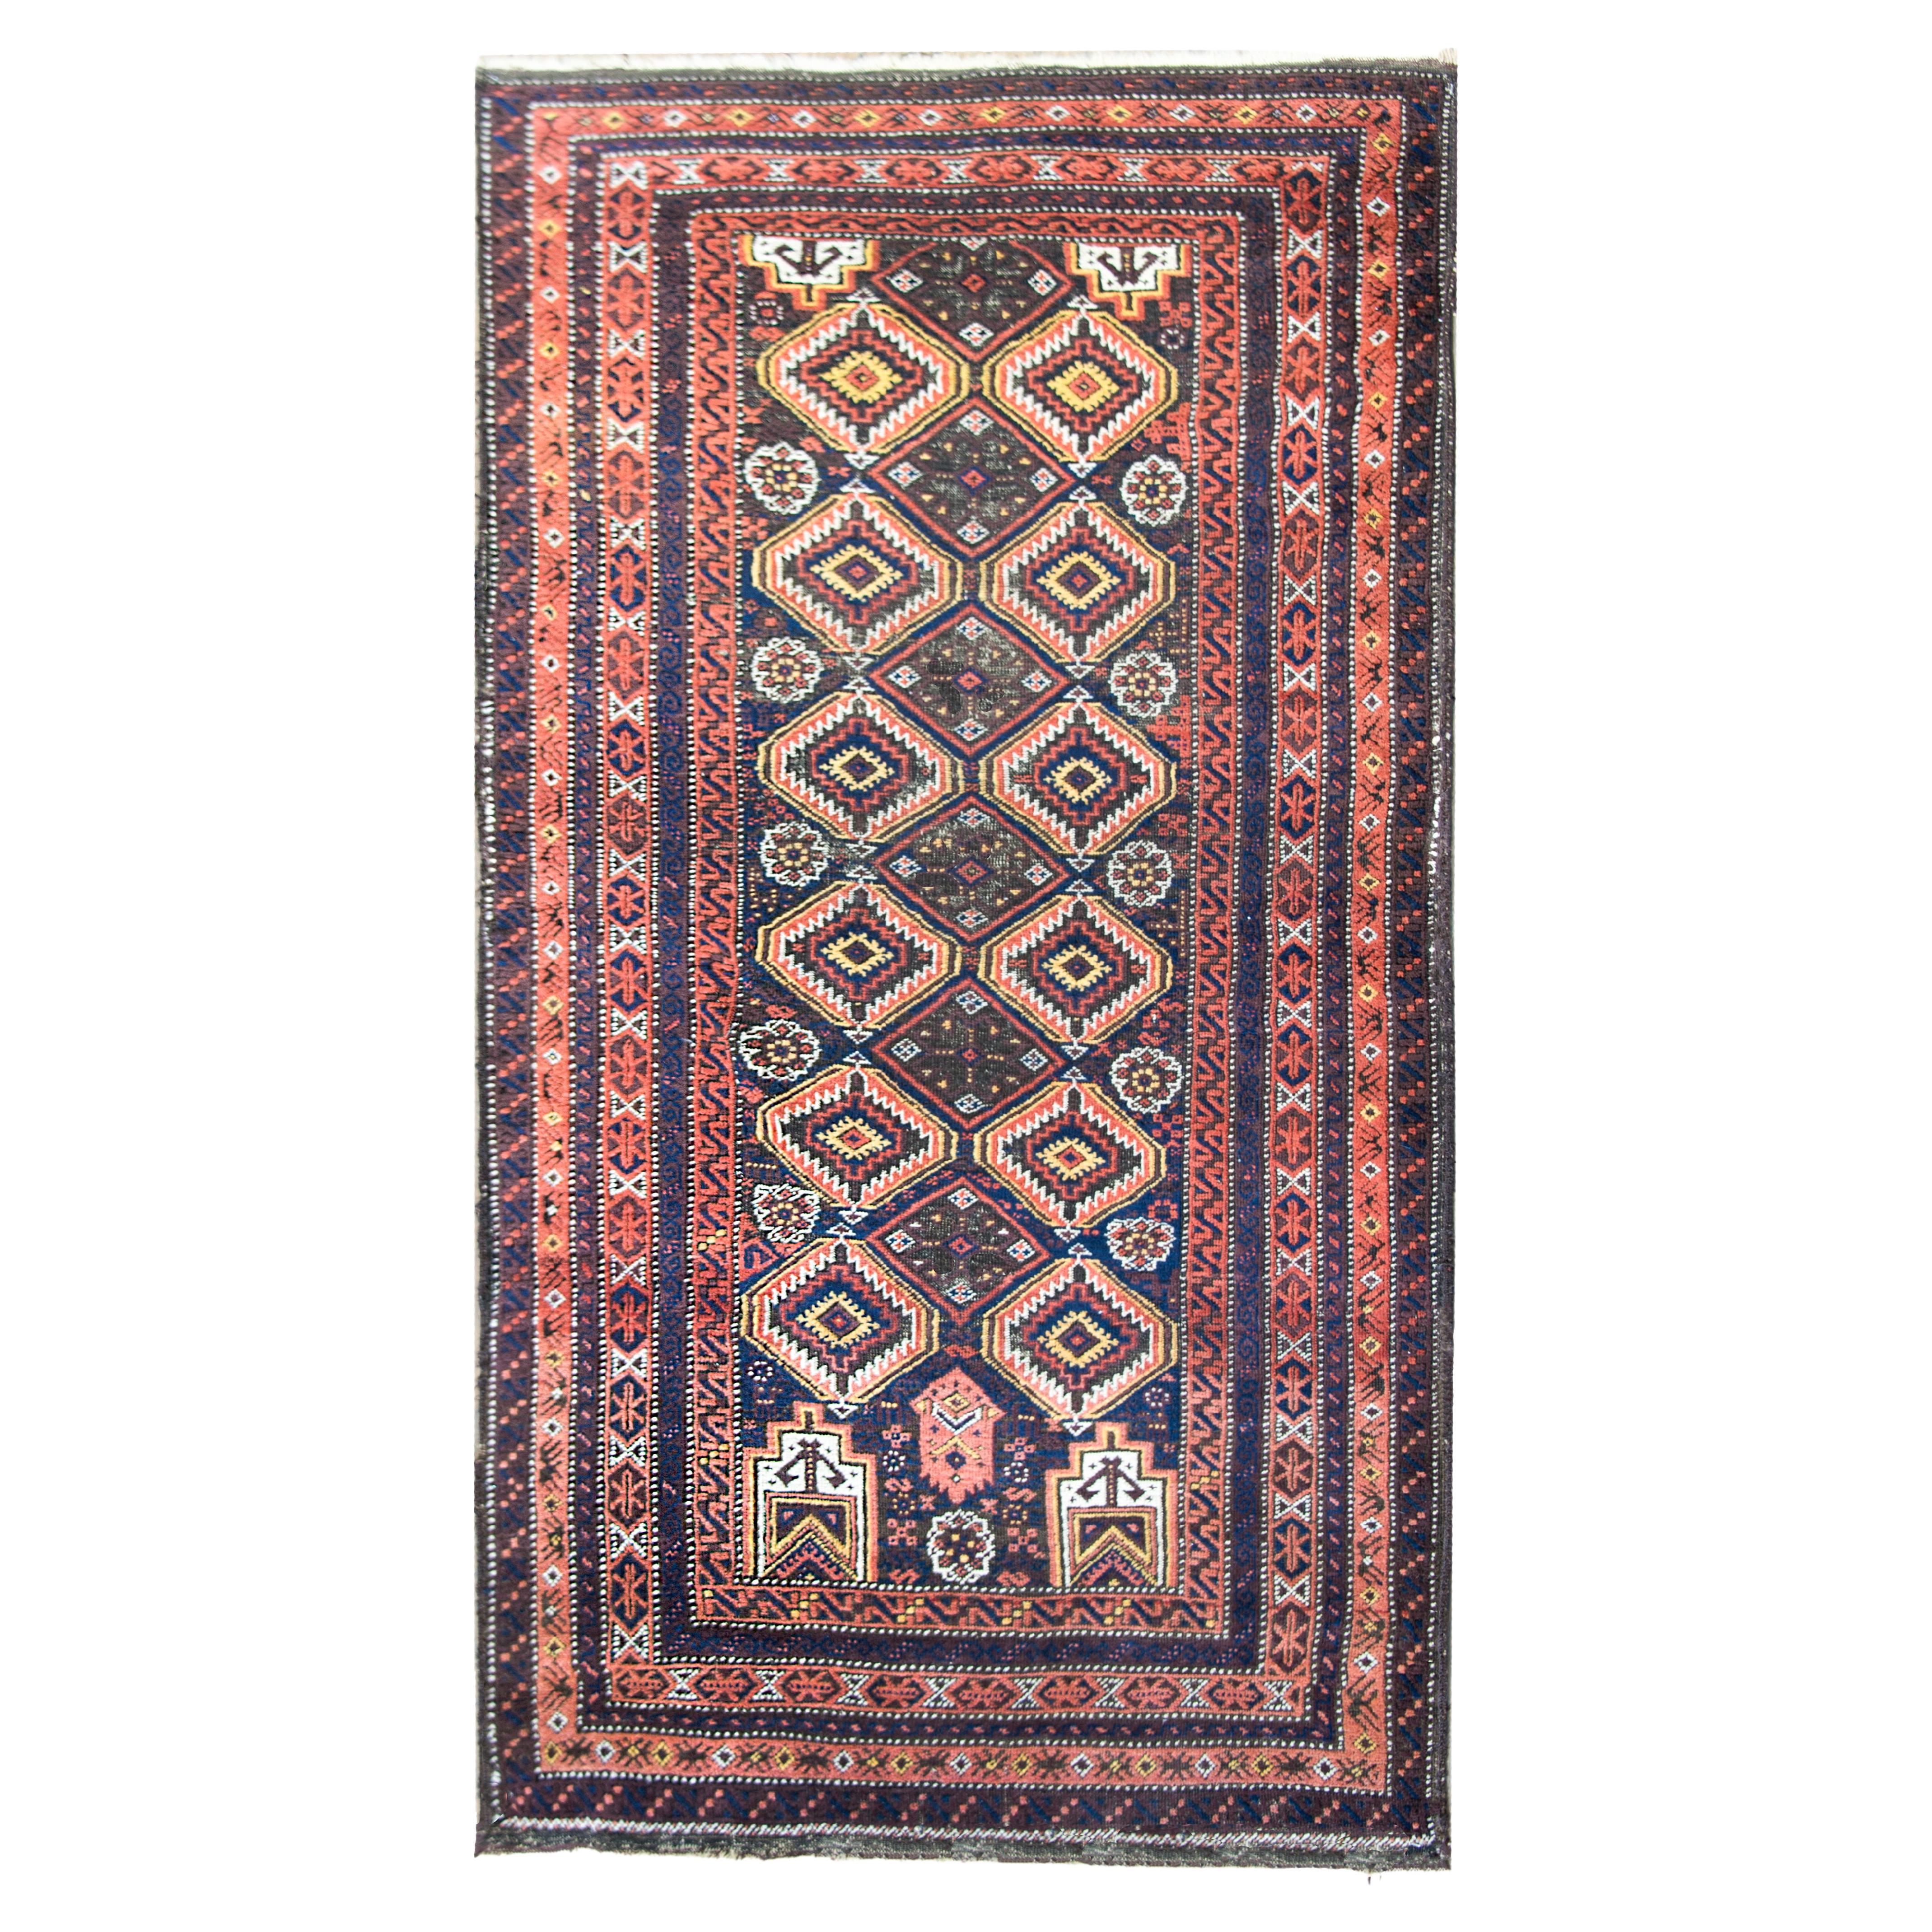 Early 20th Century Persian Baluch Rug